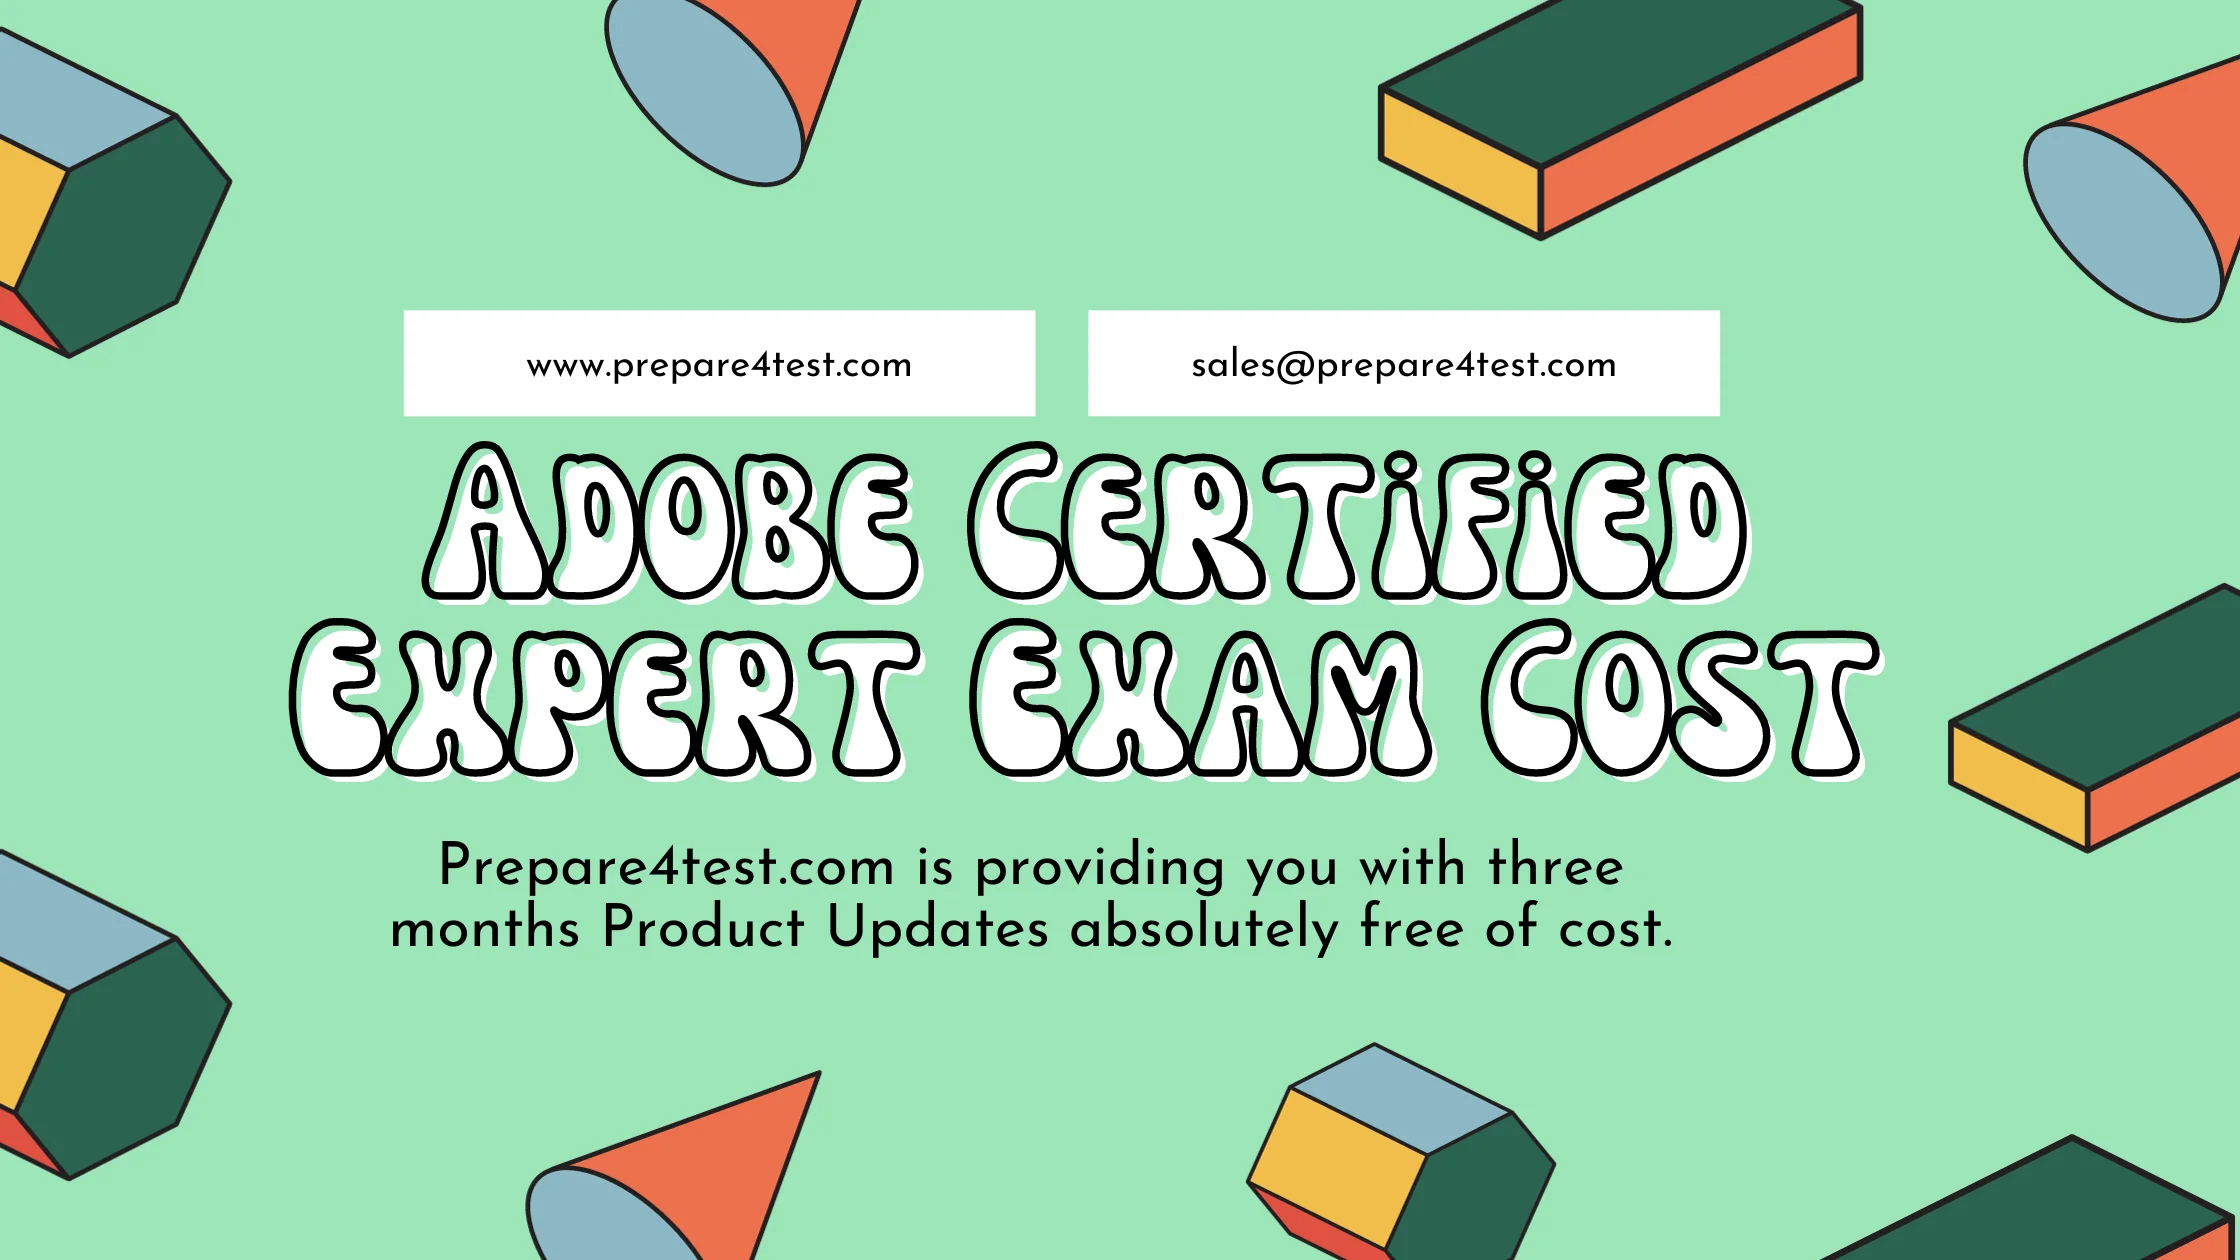 Adobe Certified Expert Exam Cost promotion